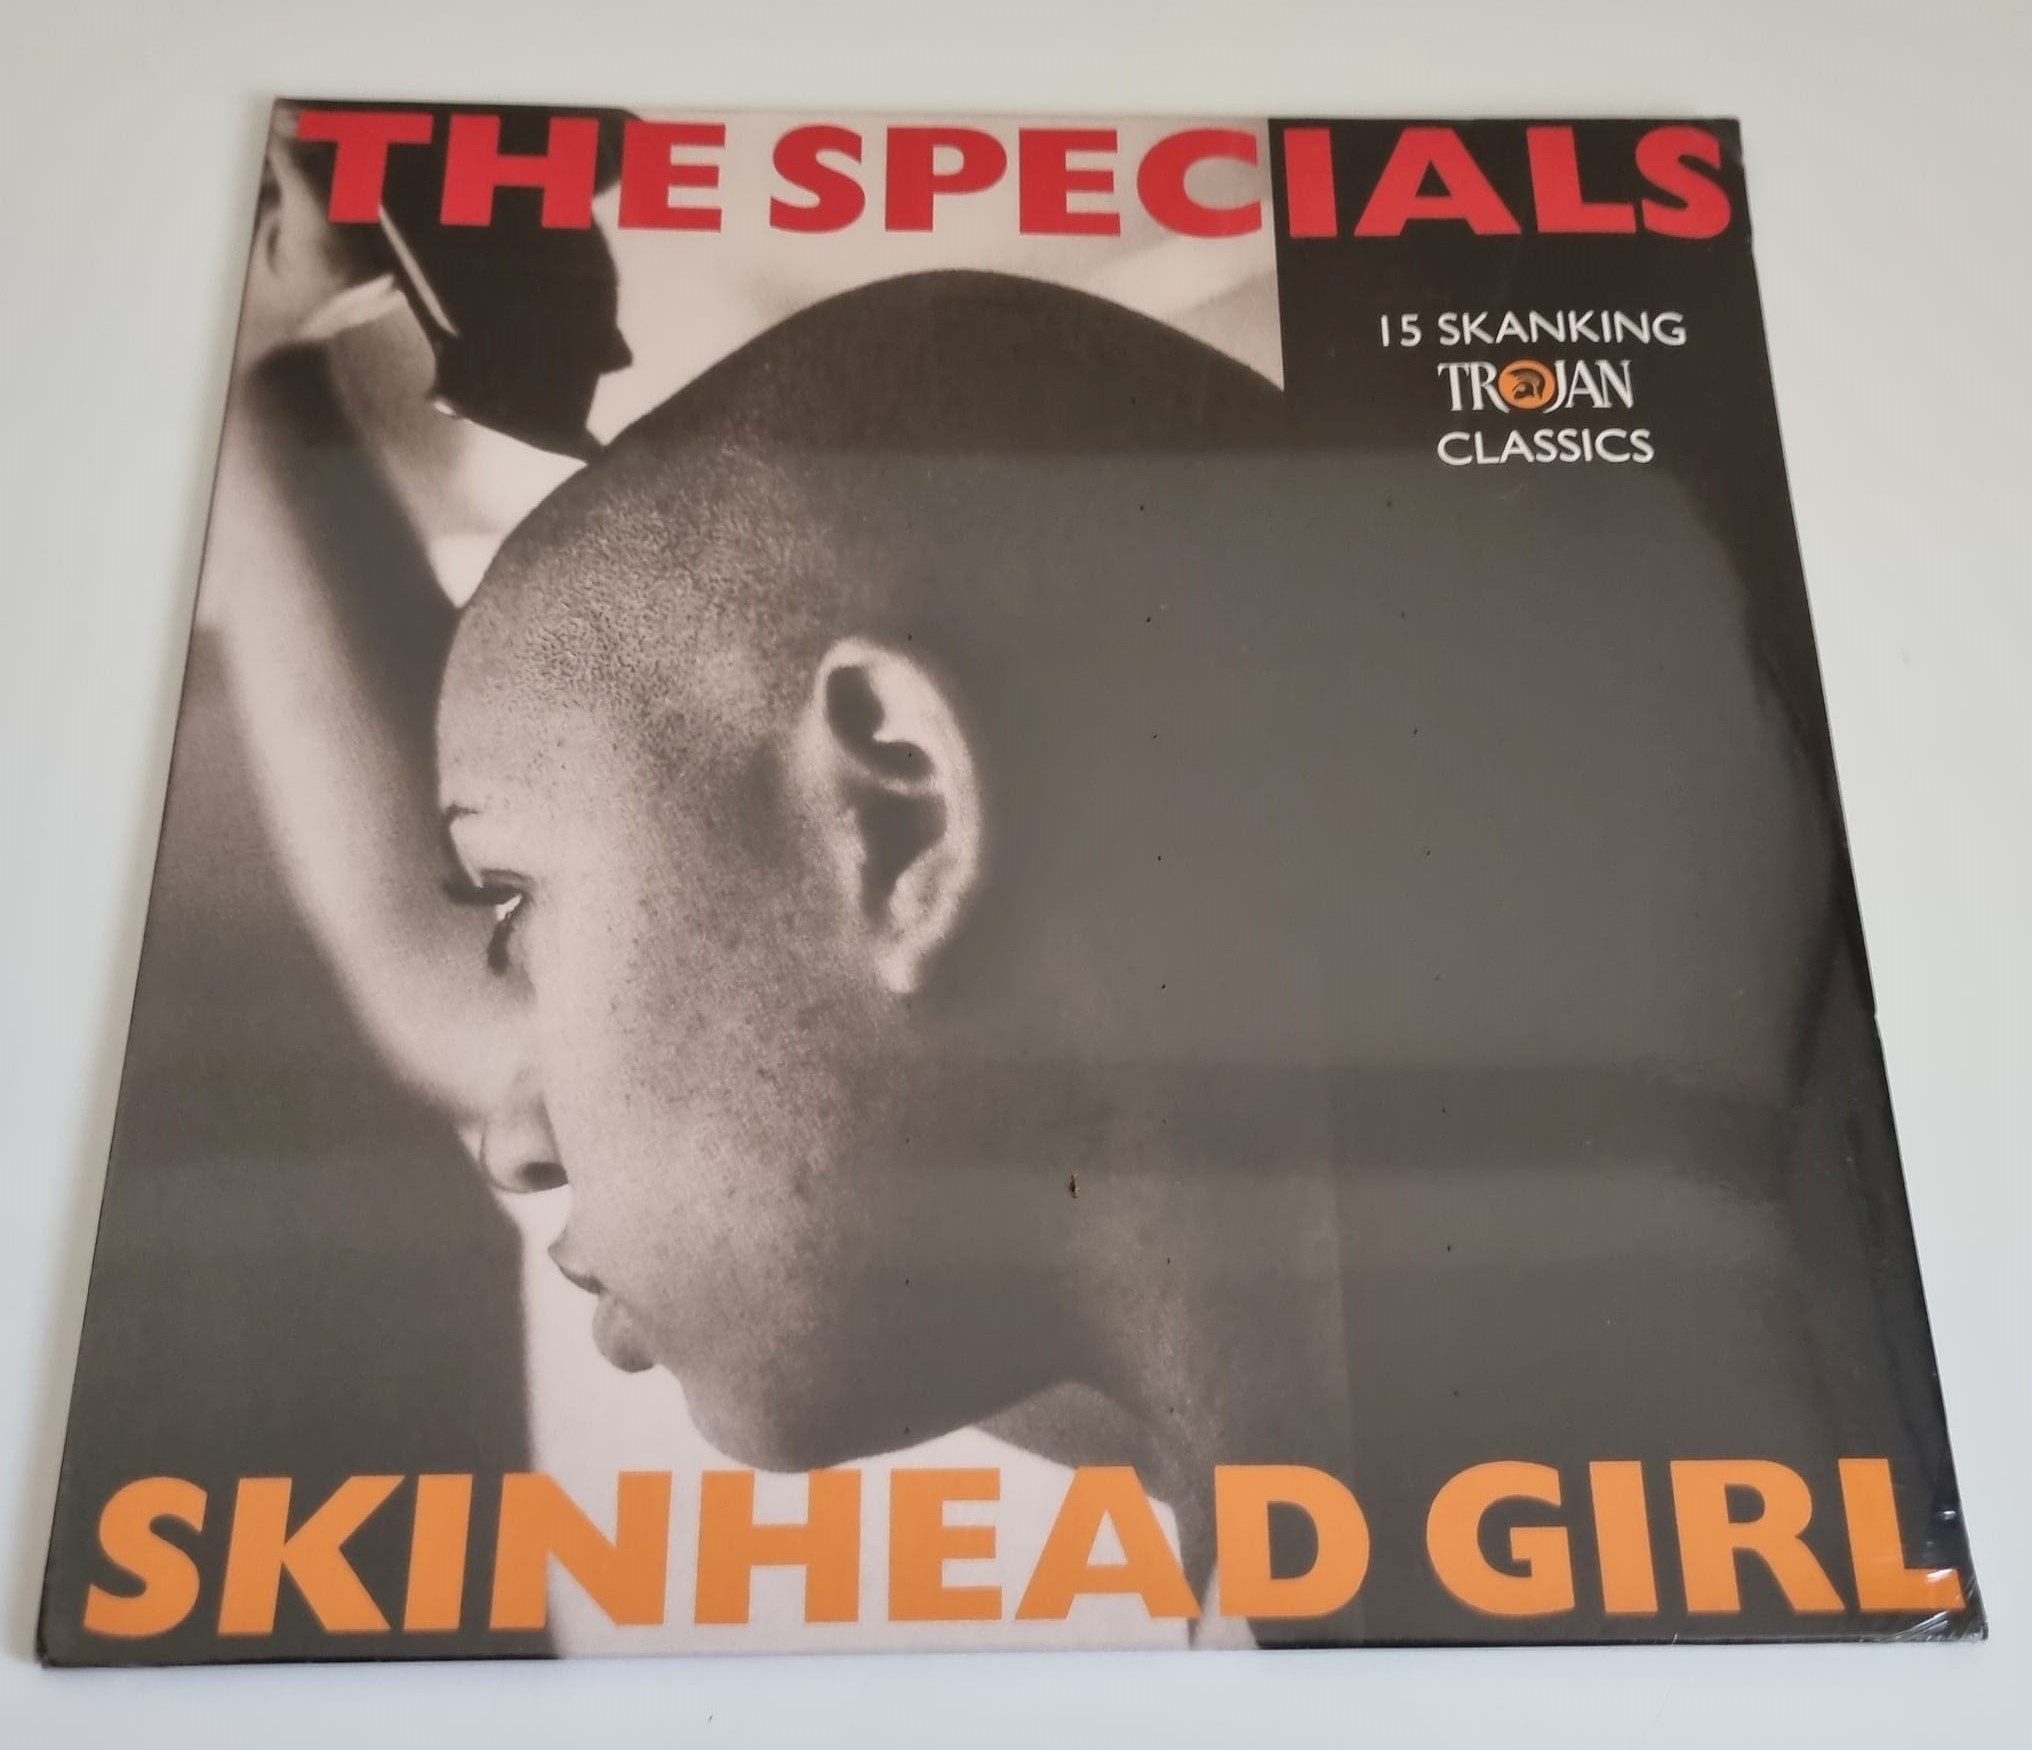 Buy this rare Specials record by clicking here